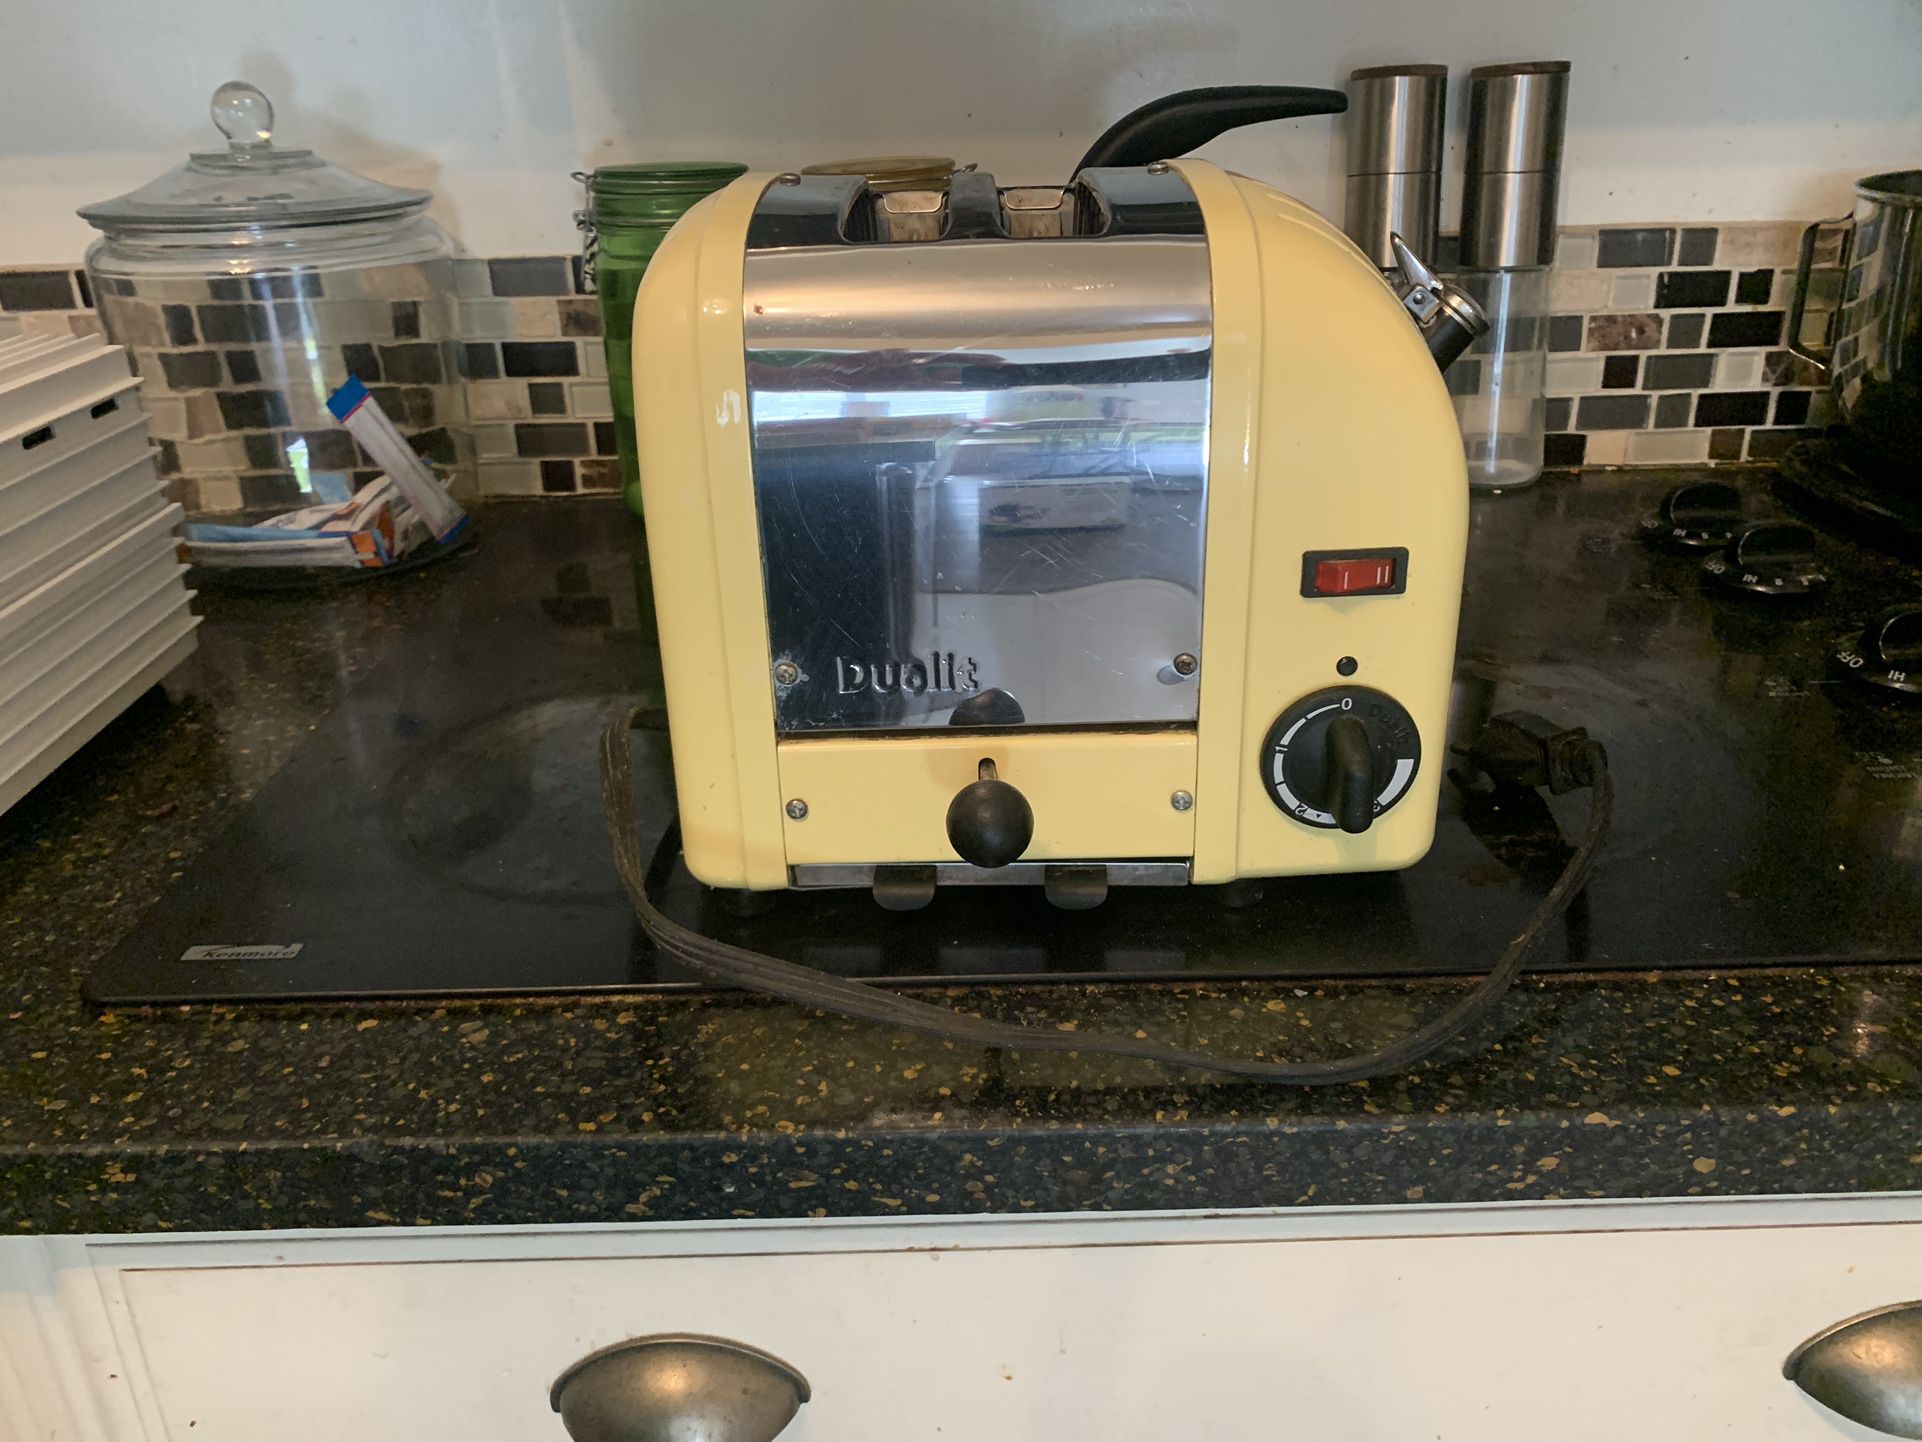 Dualit Double Toaster